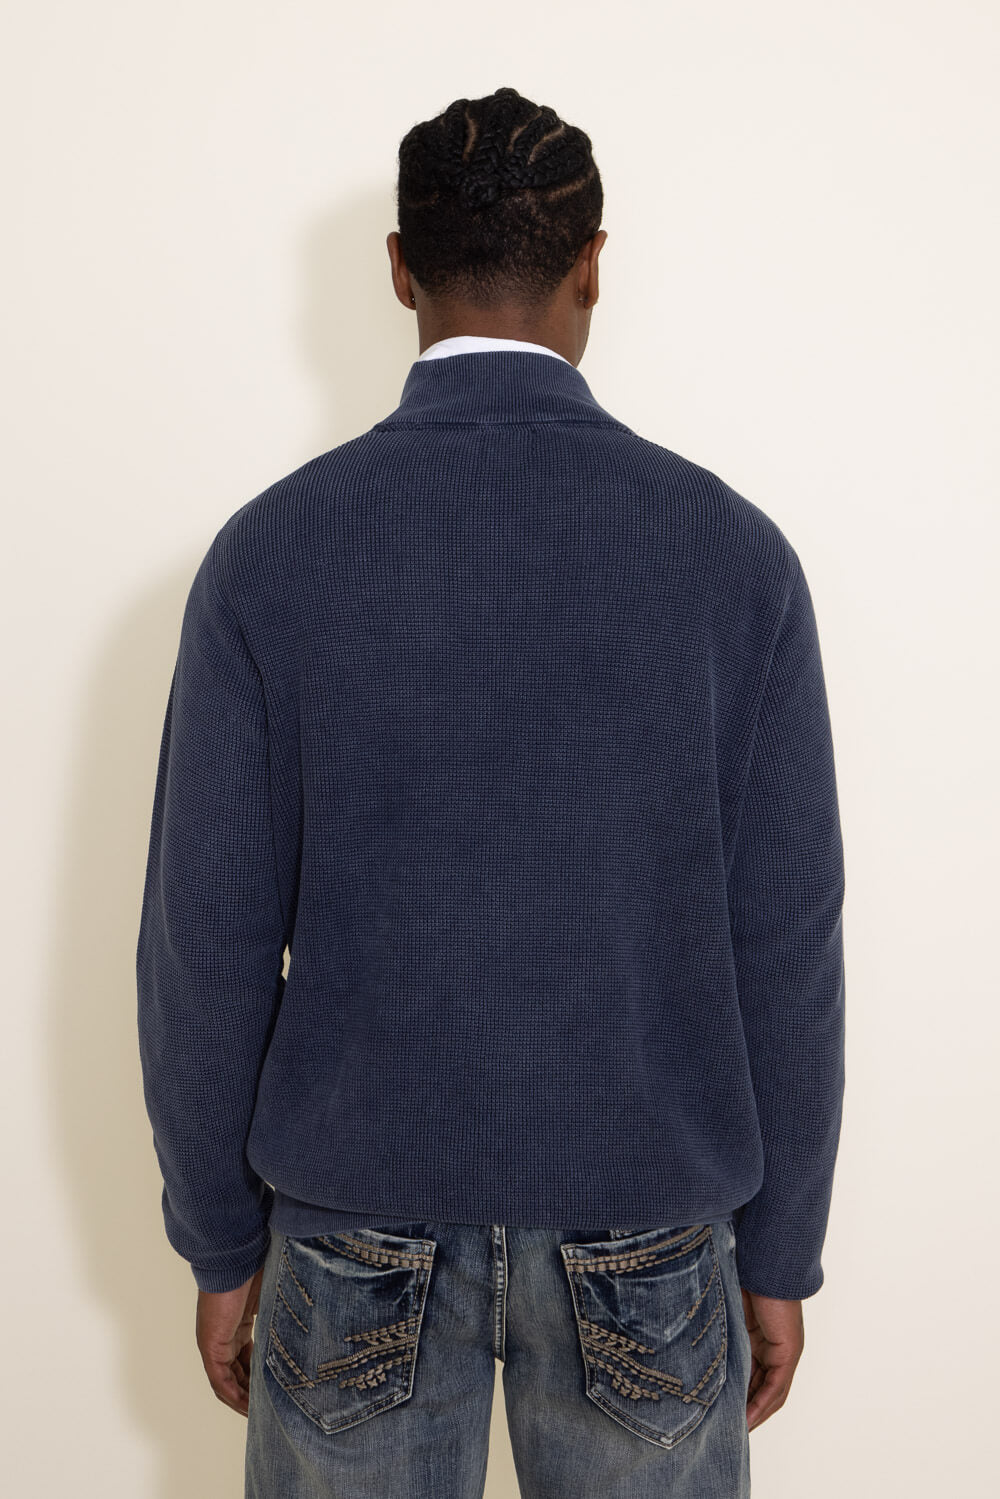 Sand Washed ¼ Zip Sweater for Men in Navy Blue | 9050-MIDNTNVY 